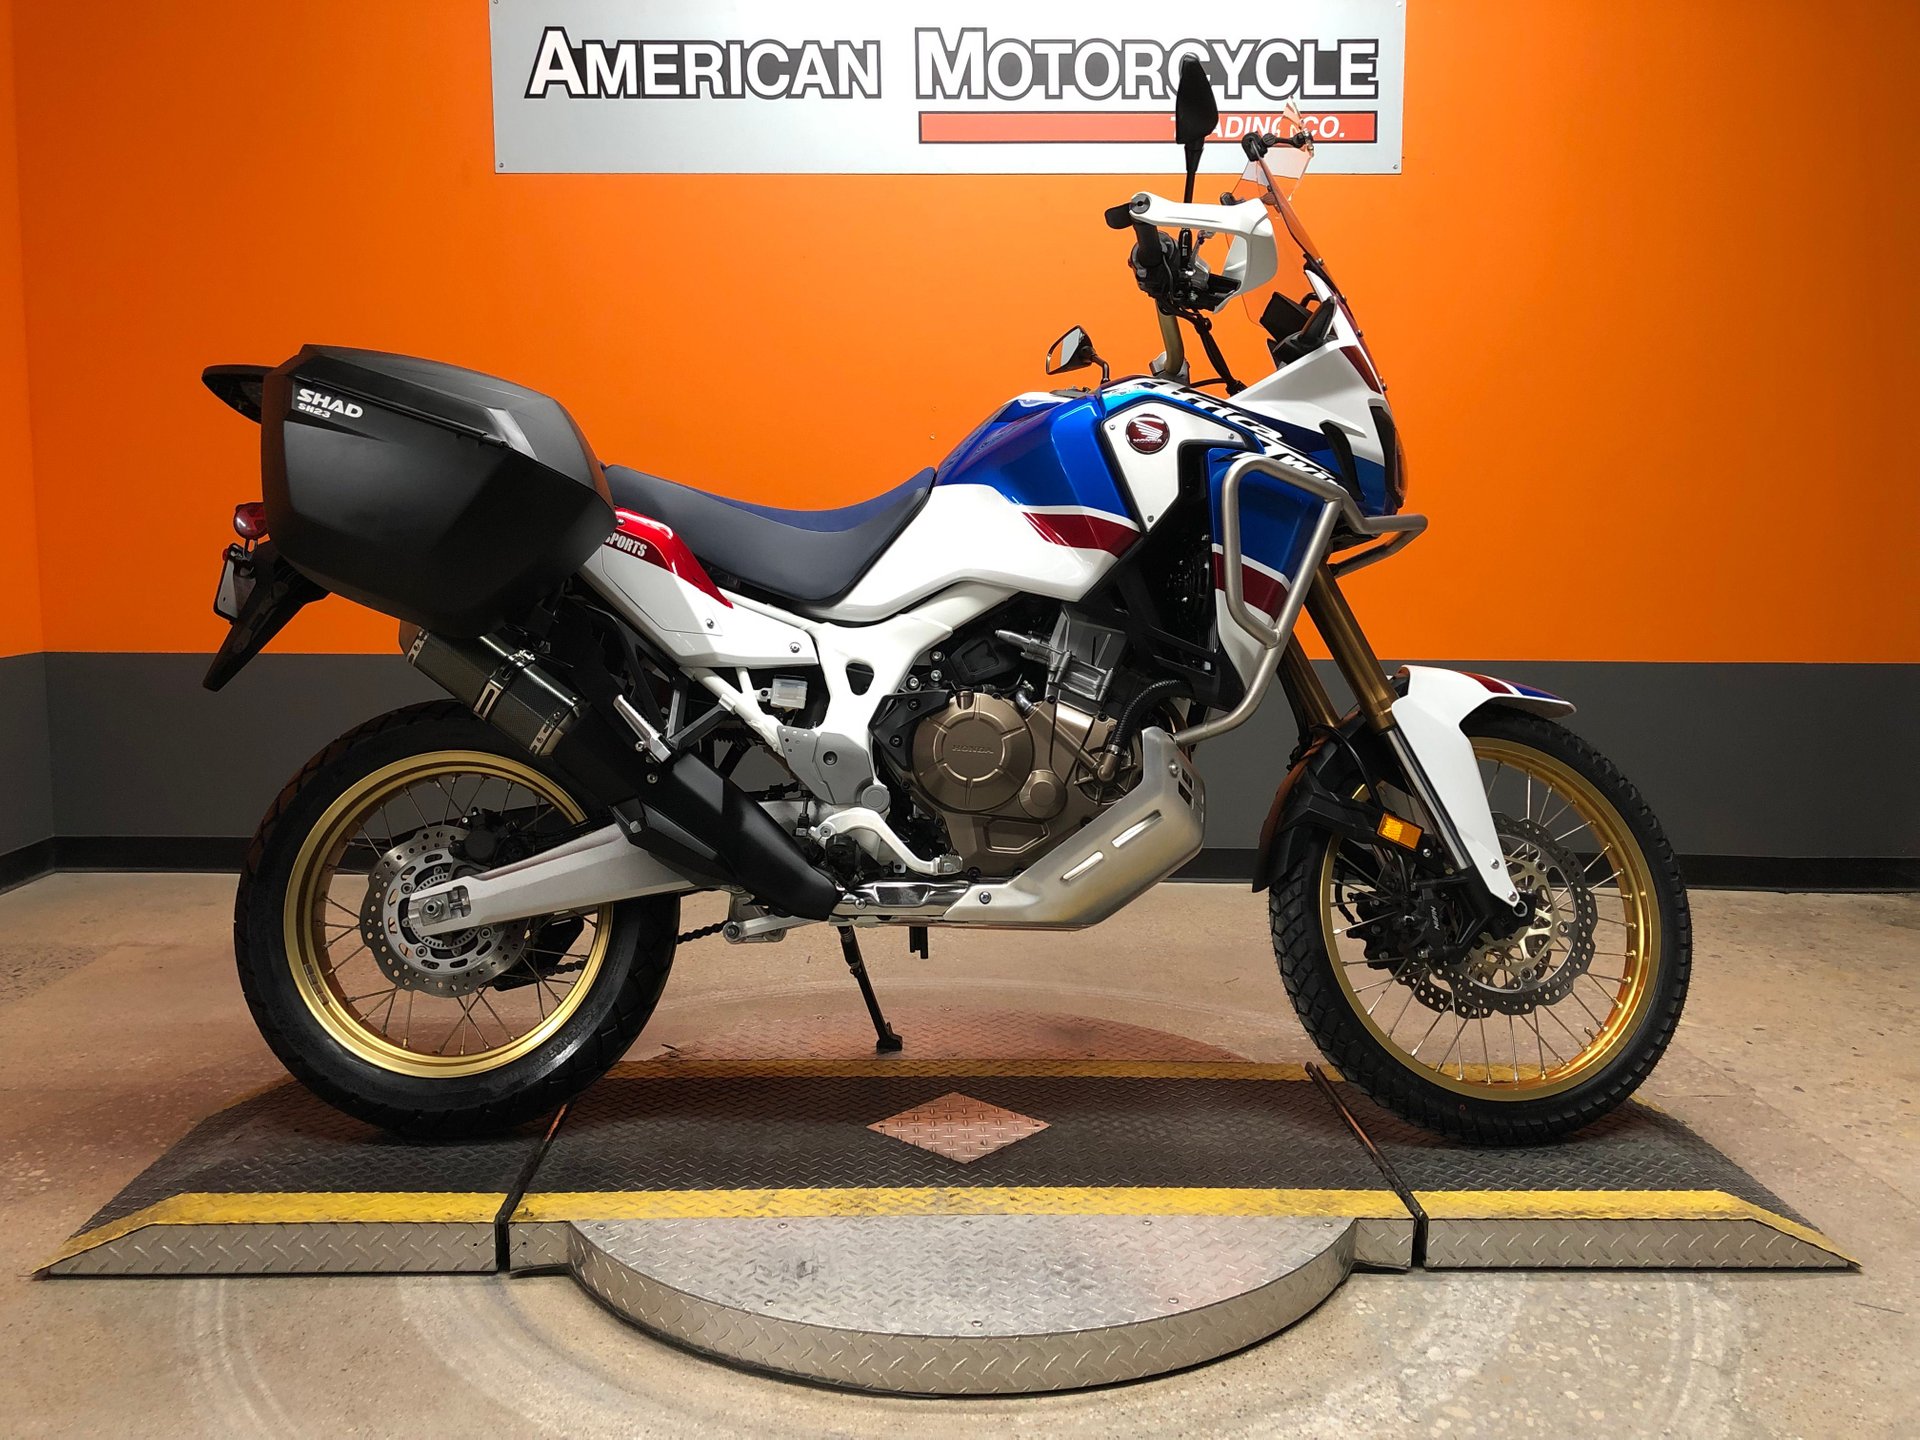 sarcoma extraterrestre Socialista 2018 Honda Africa Twin | American Motorcycle Trading Company - Used Harley  Davidson Motorcycles